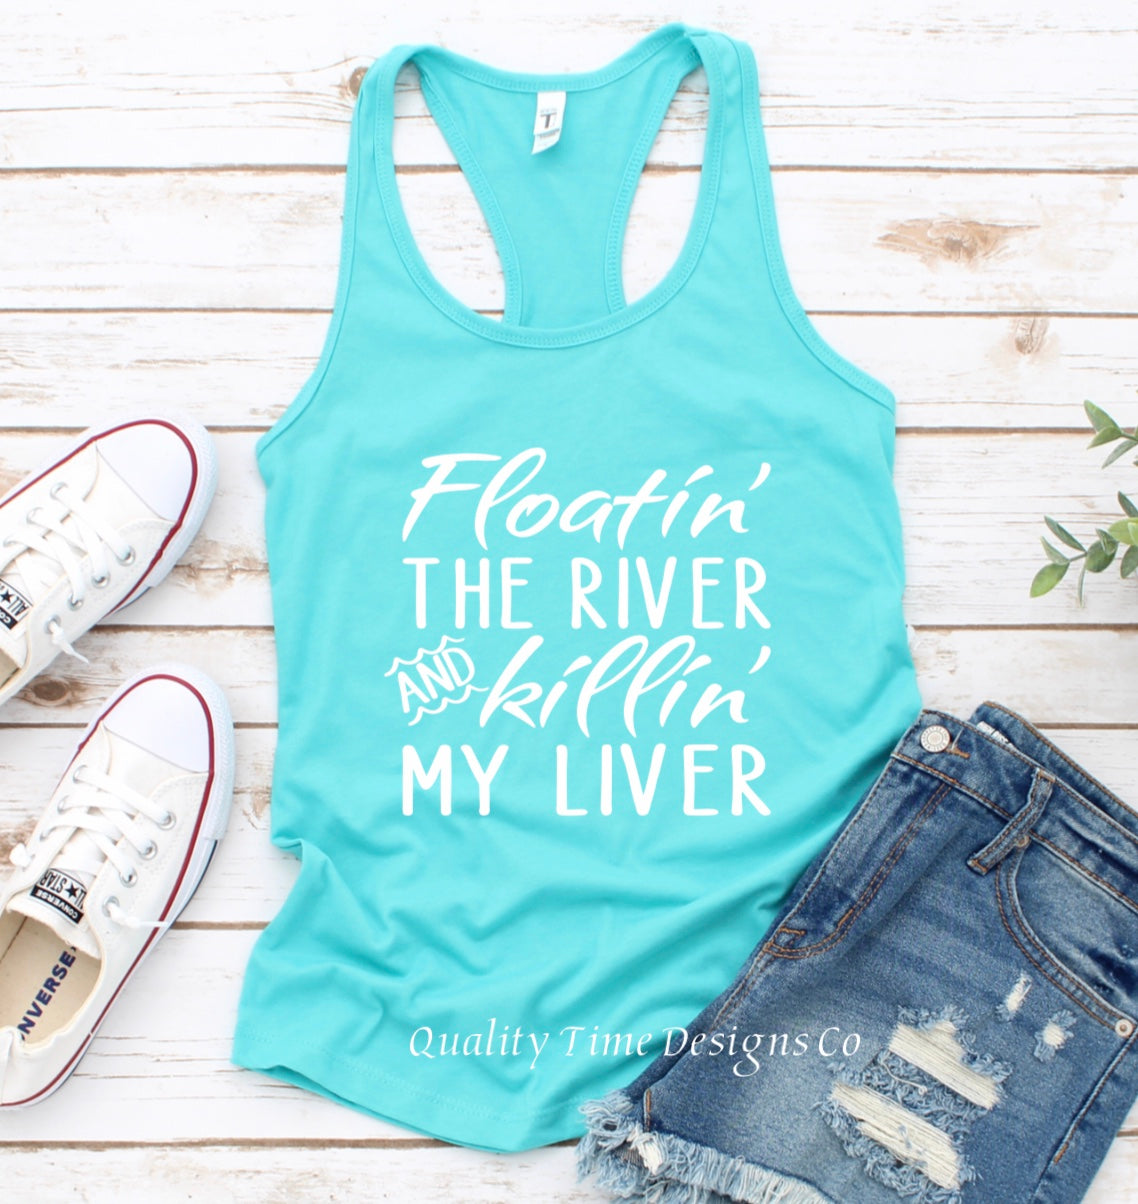 Floatin the River and Killin My Liver racerback tank top